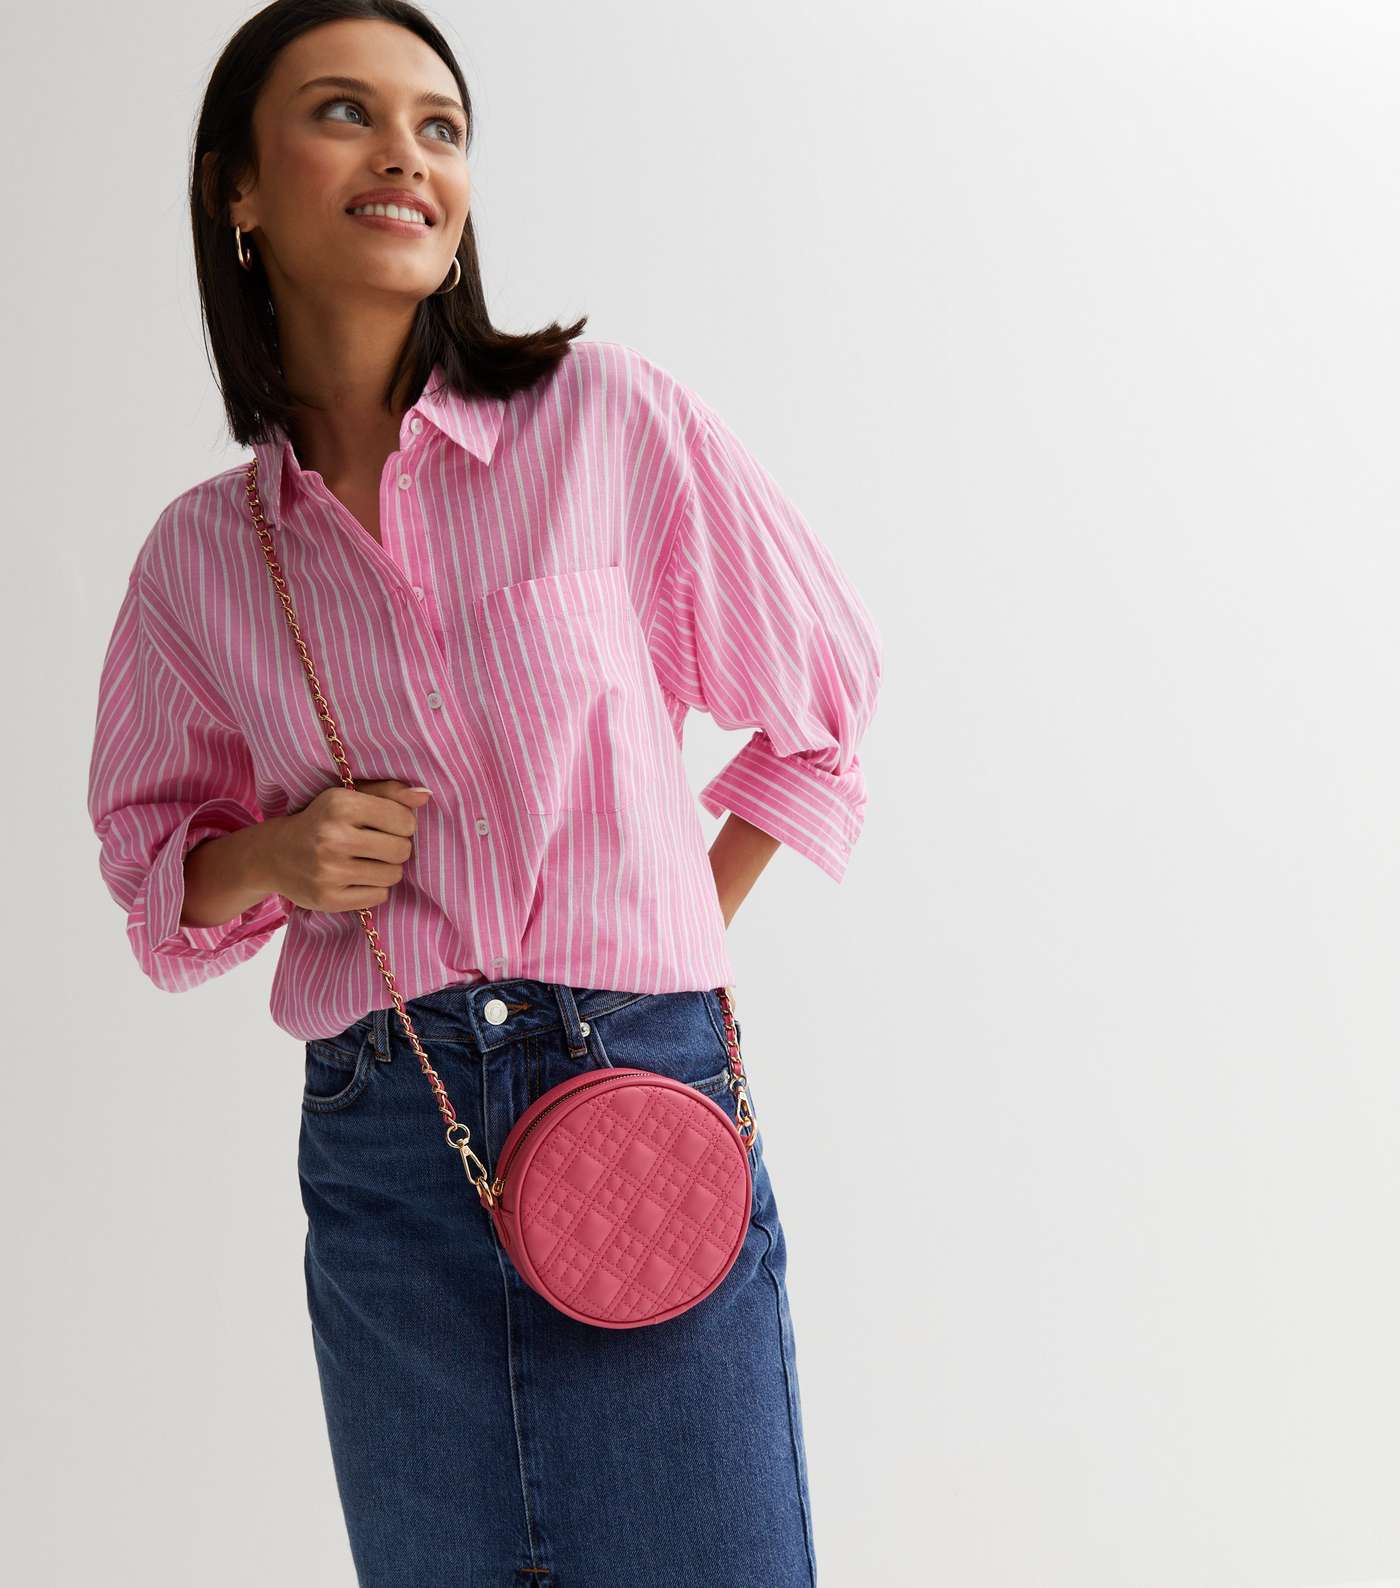 Bright Pink Leather-Look Quilted Circle Cross Body Bag Image 2